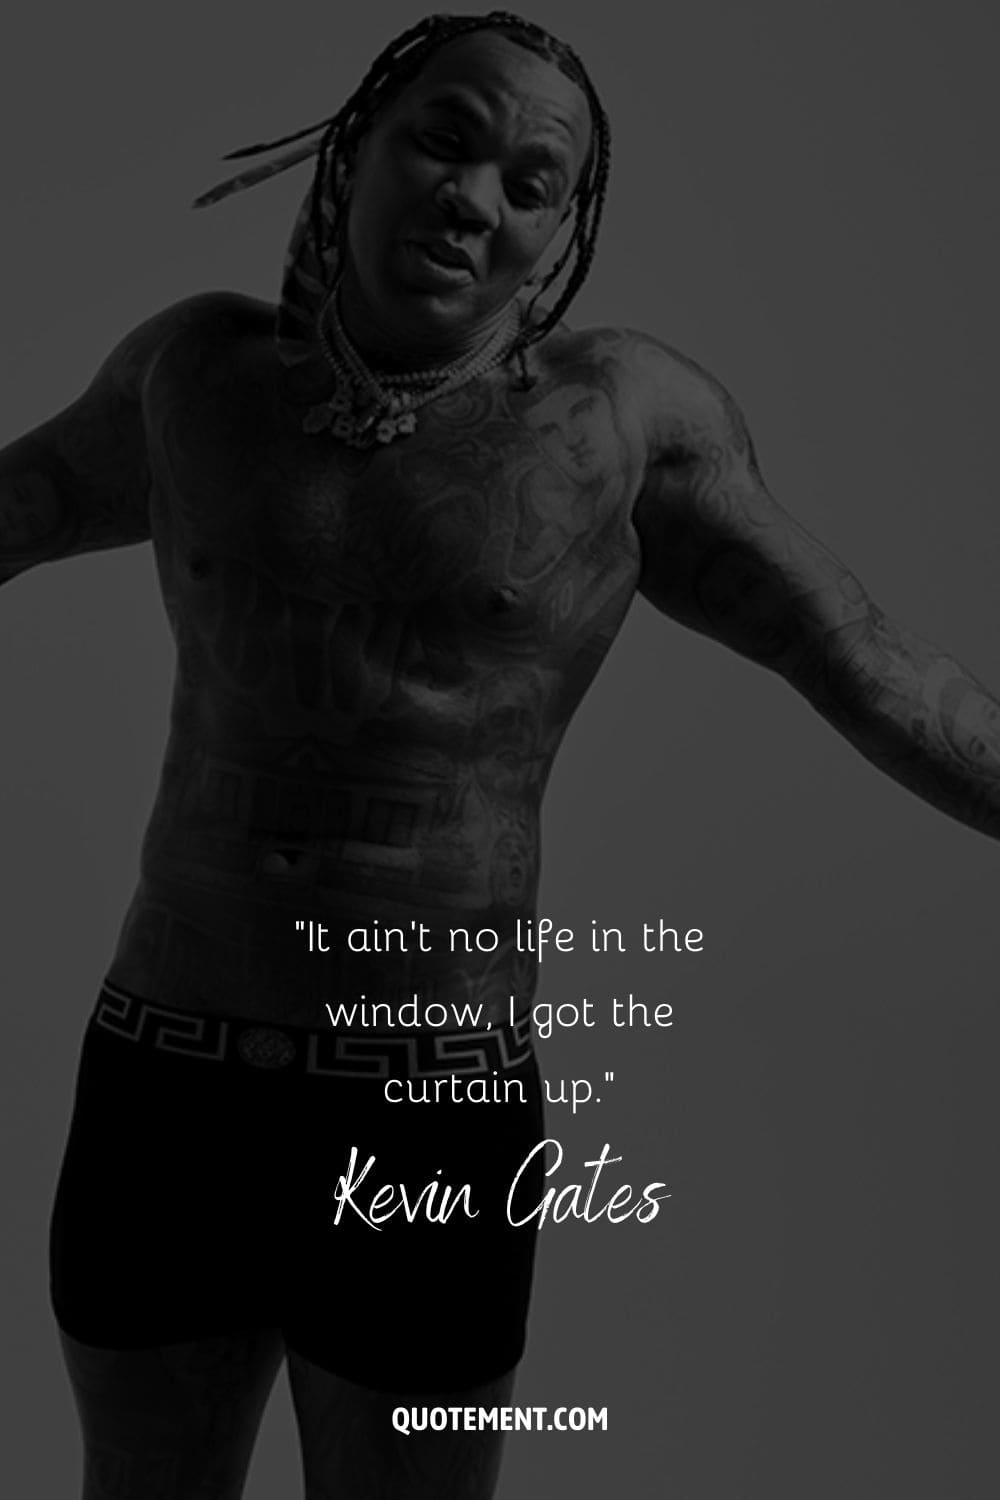 “It ain't no life in the window, I got the curtain up.” – Kevin Gates